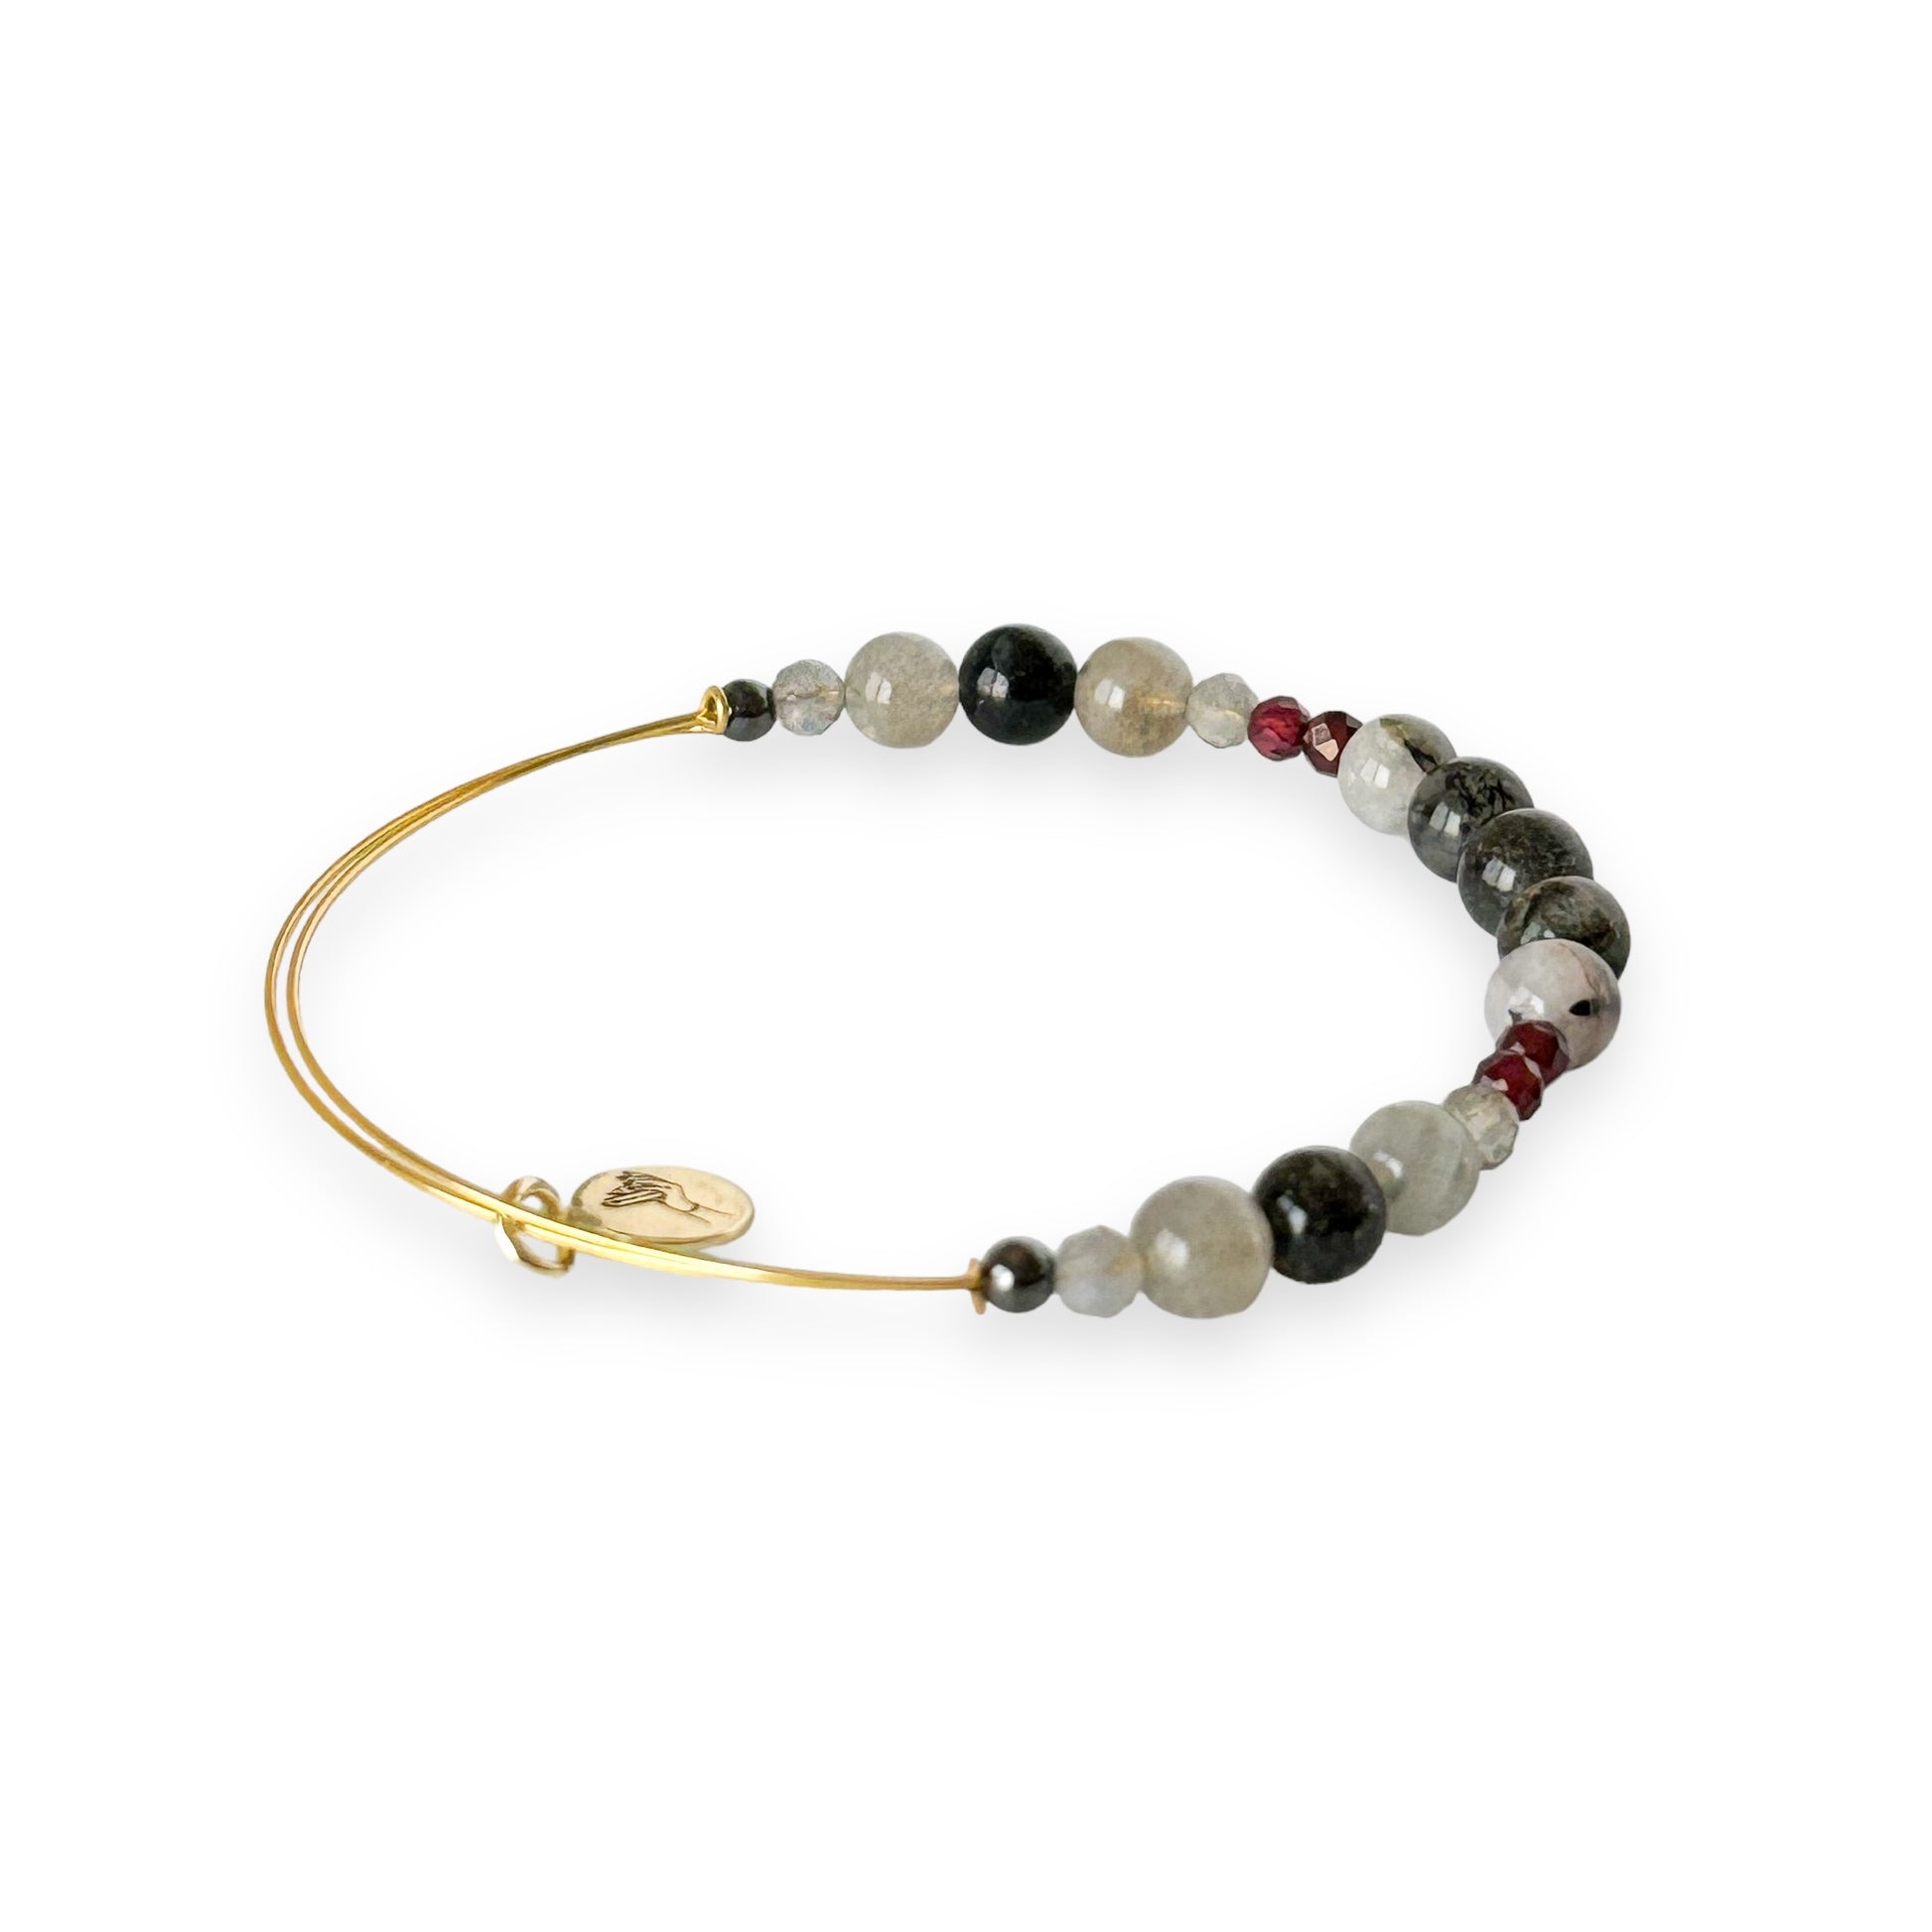 Grounded Natural Crystal Bracelet with Red Garnet accents